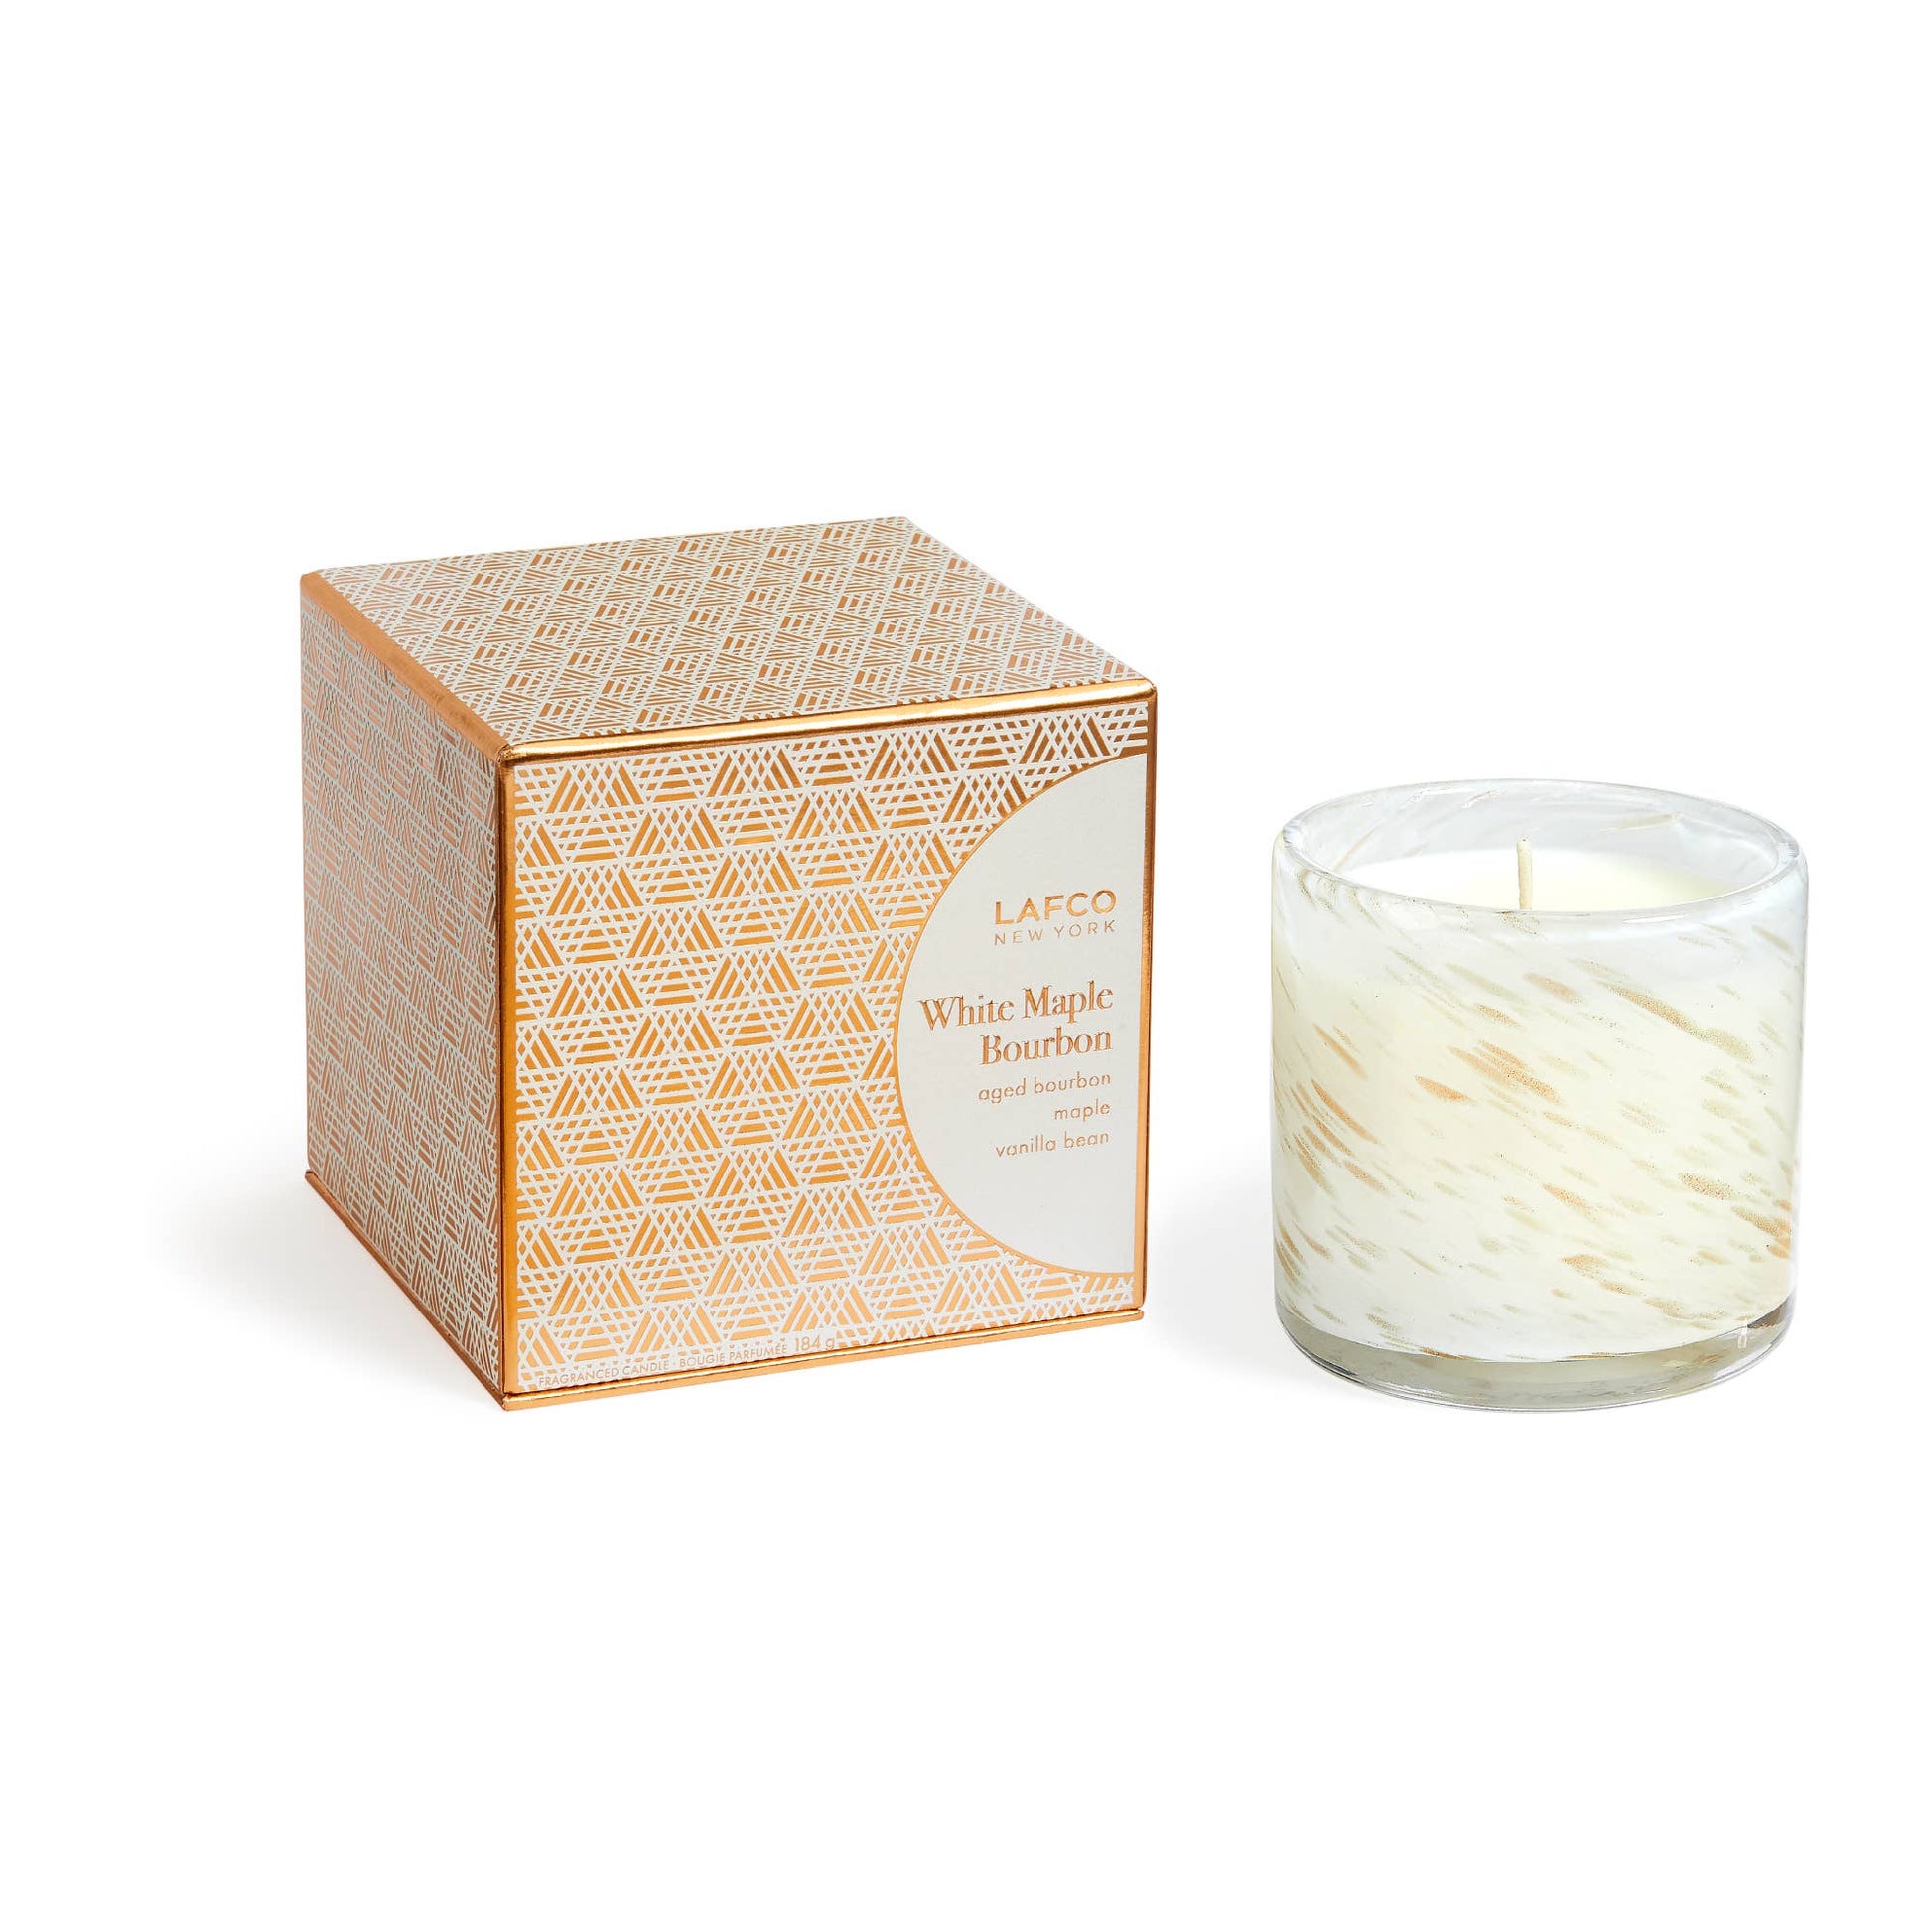 LAFCO White Maple Scented Candle - Osmology Scented Candles & Home Fragrance